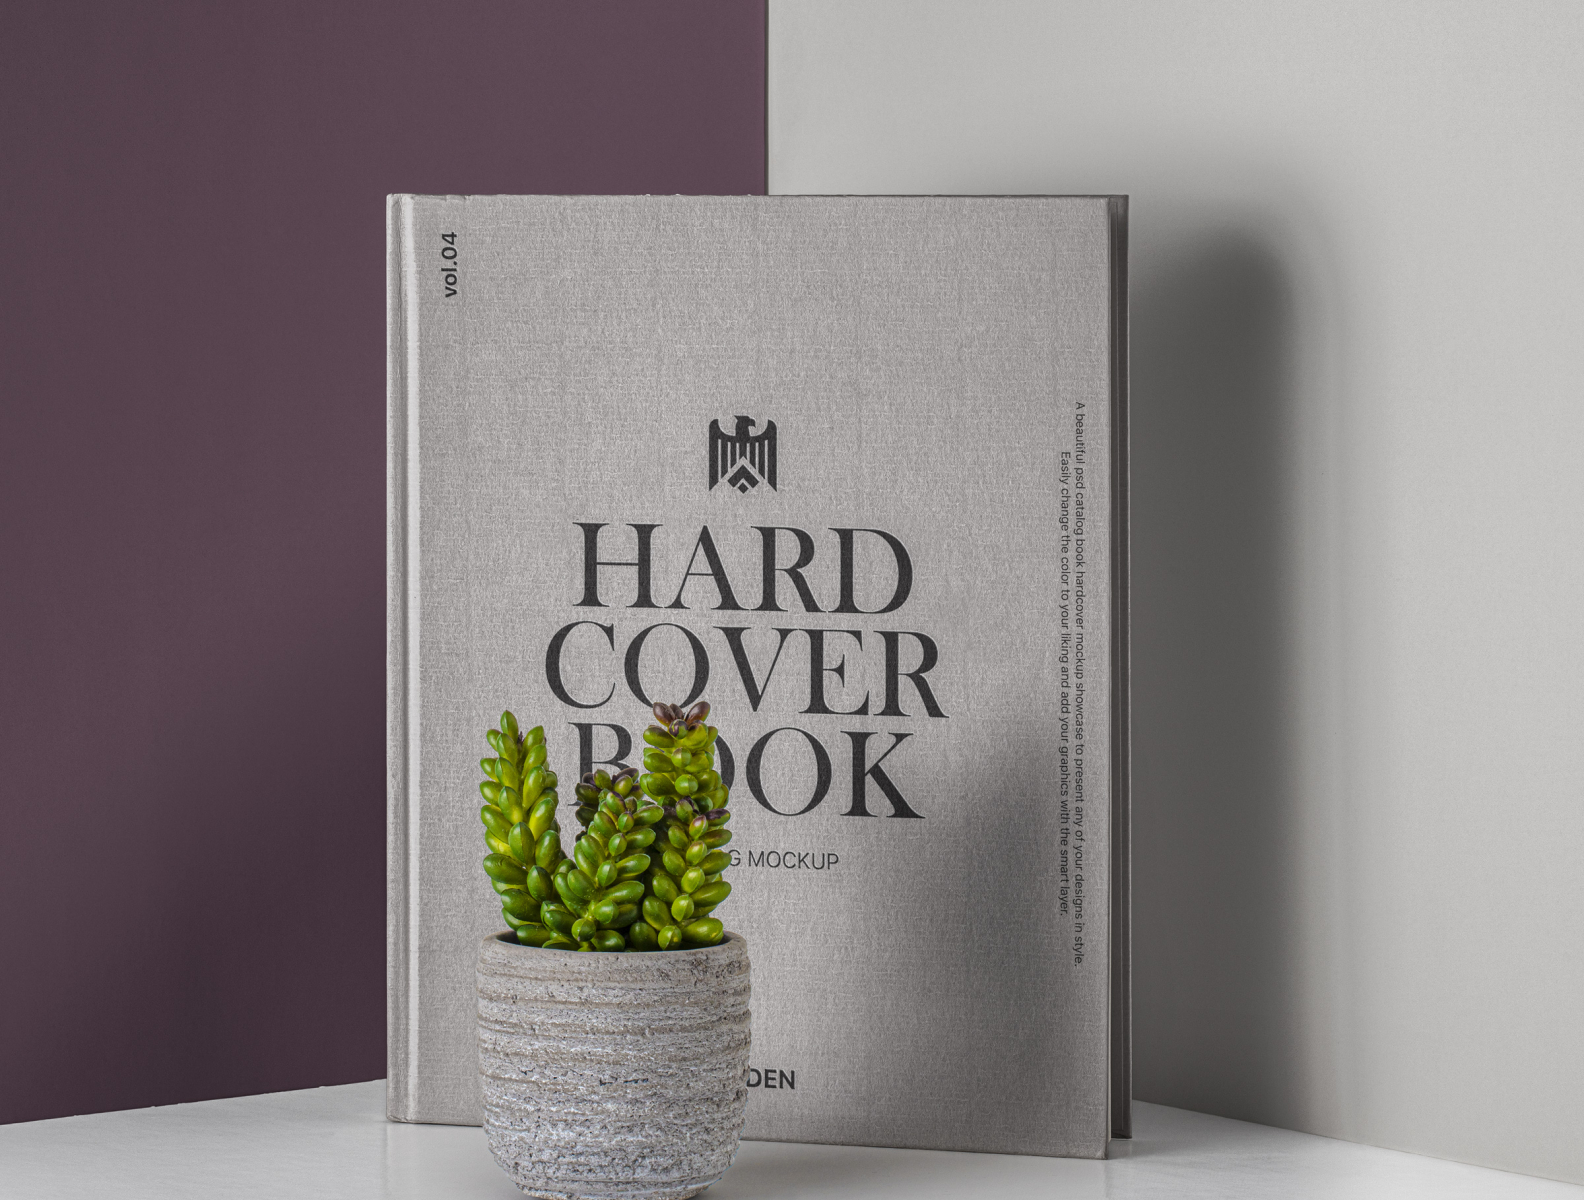 Download Free Psd Hardcover Book Catalog Mockup by Pixeden on Dribbble